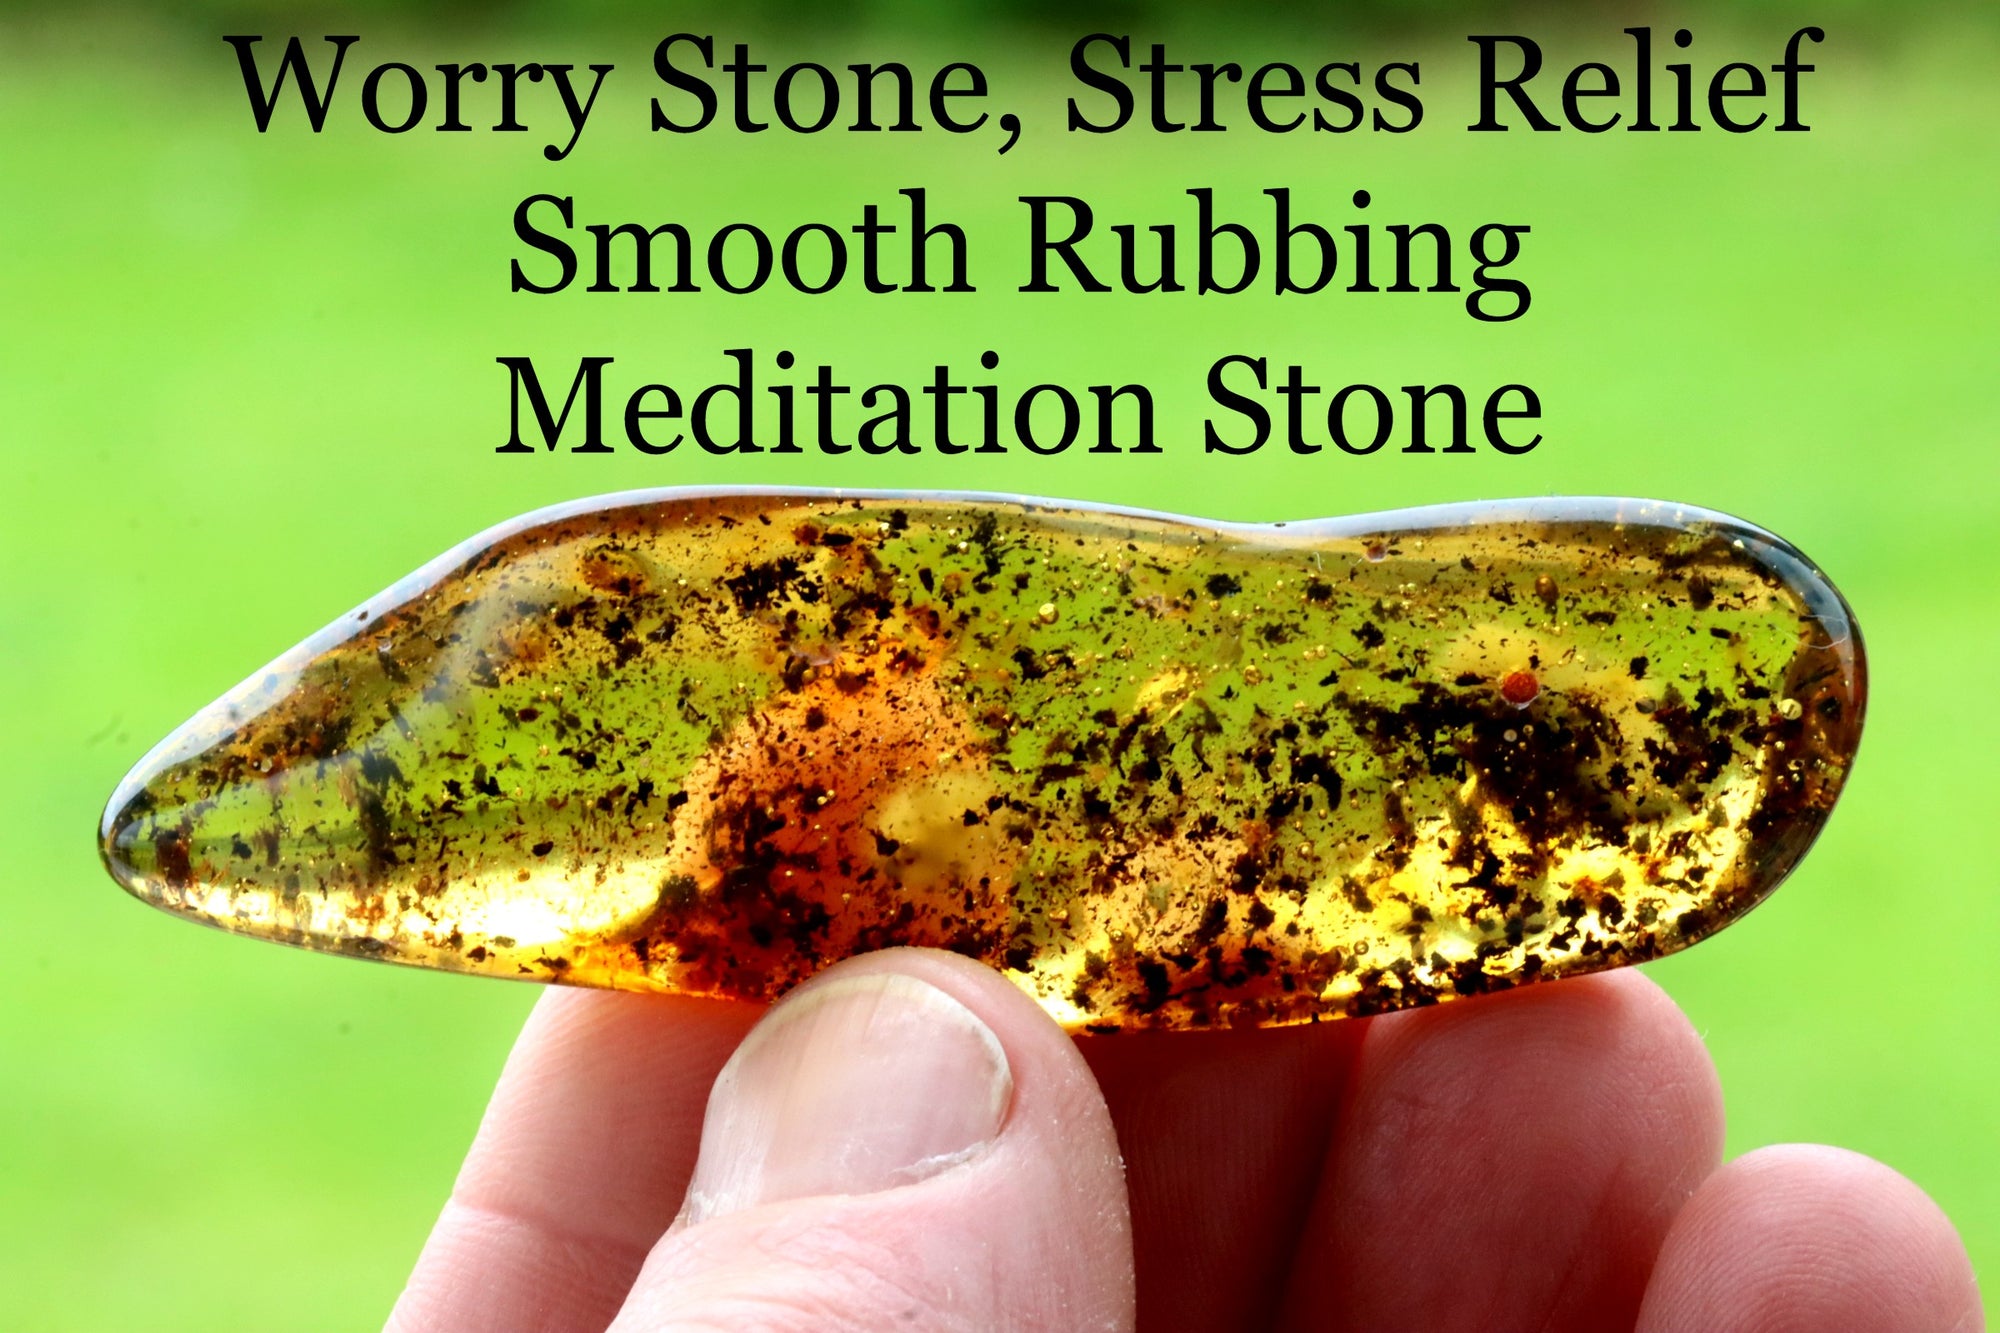 Worry Stone, Stress Relief Smooth Rubbing Meditation Stone